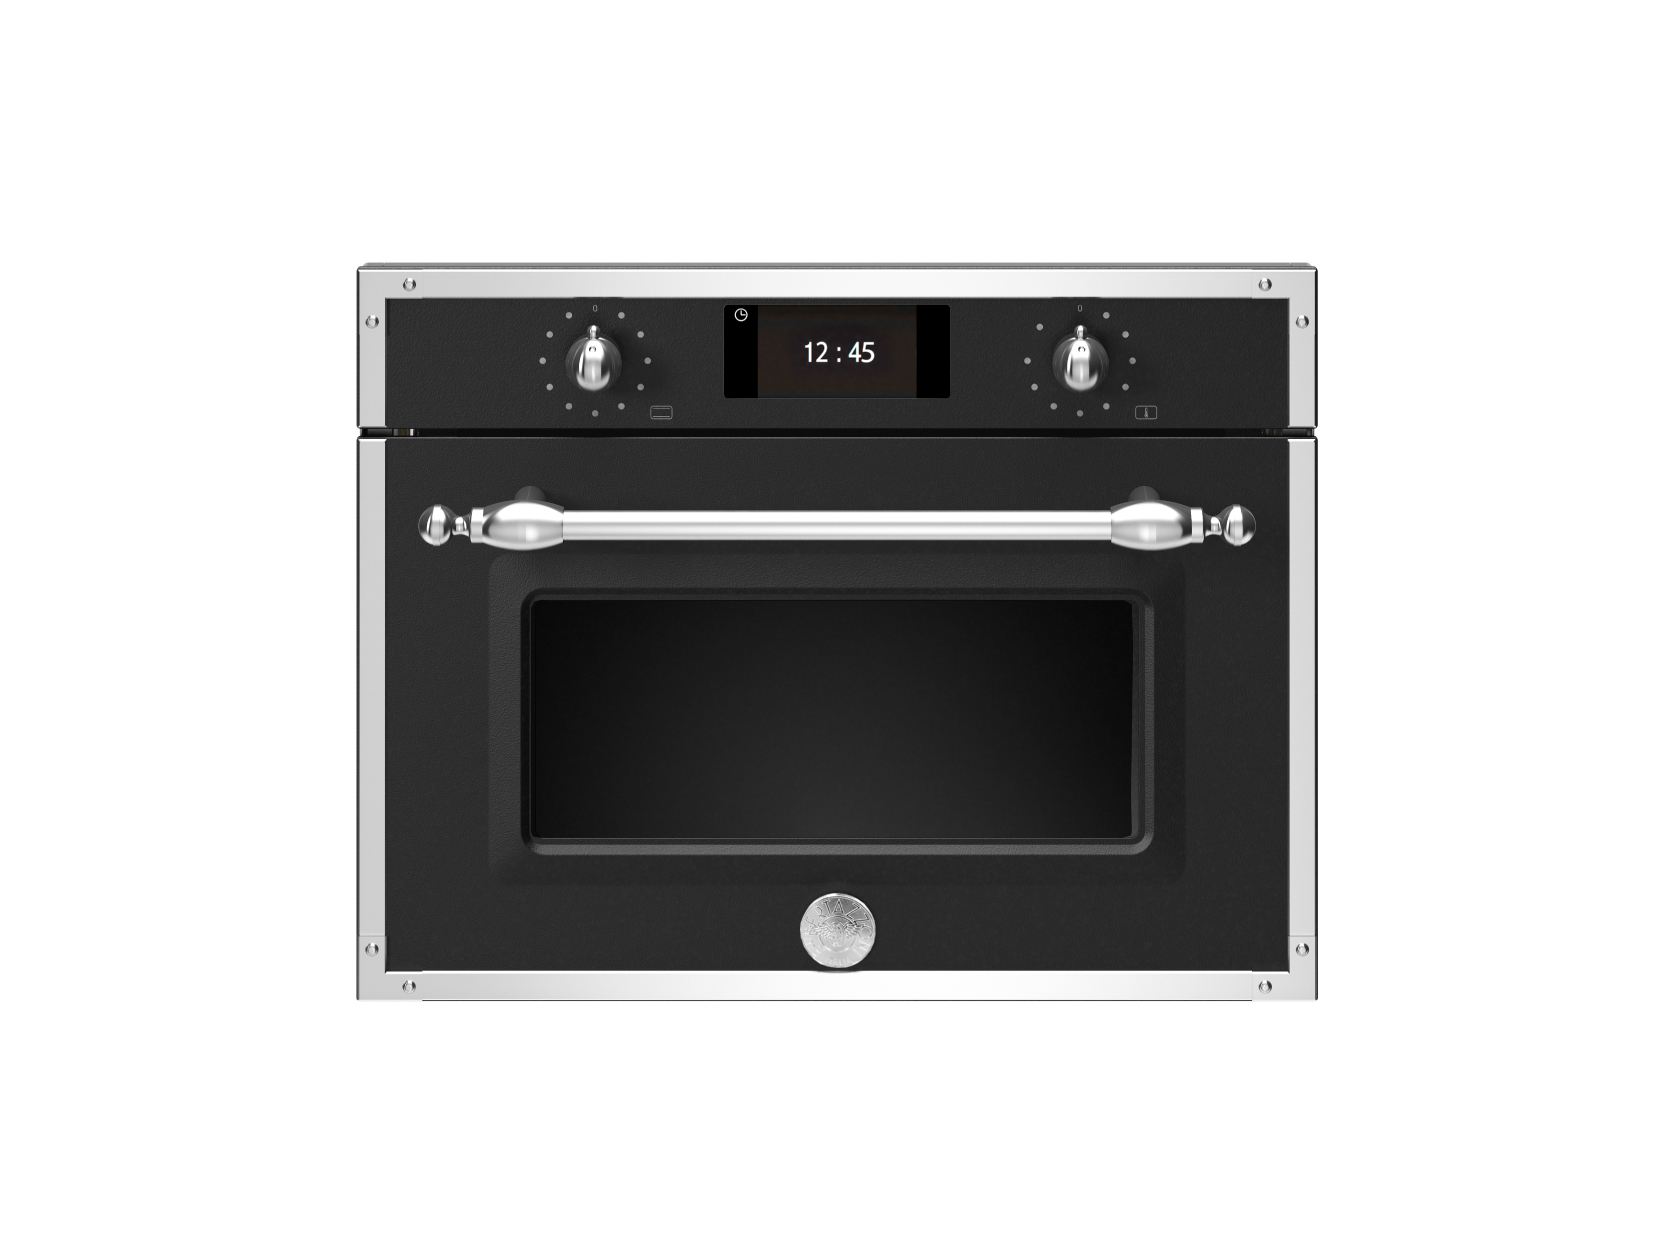 What's the difference between a combi oven and a comi microwave